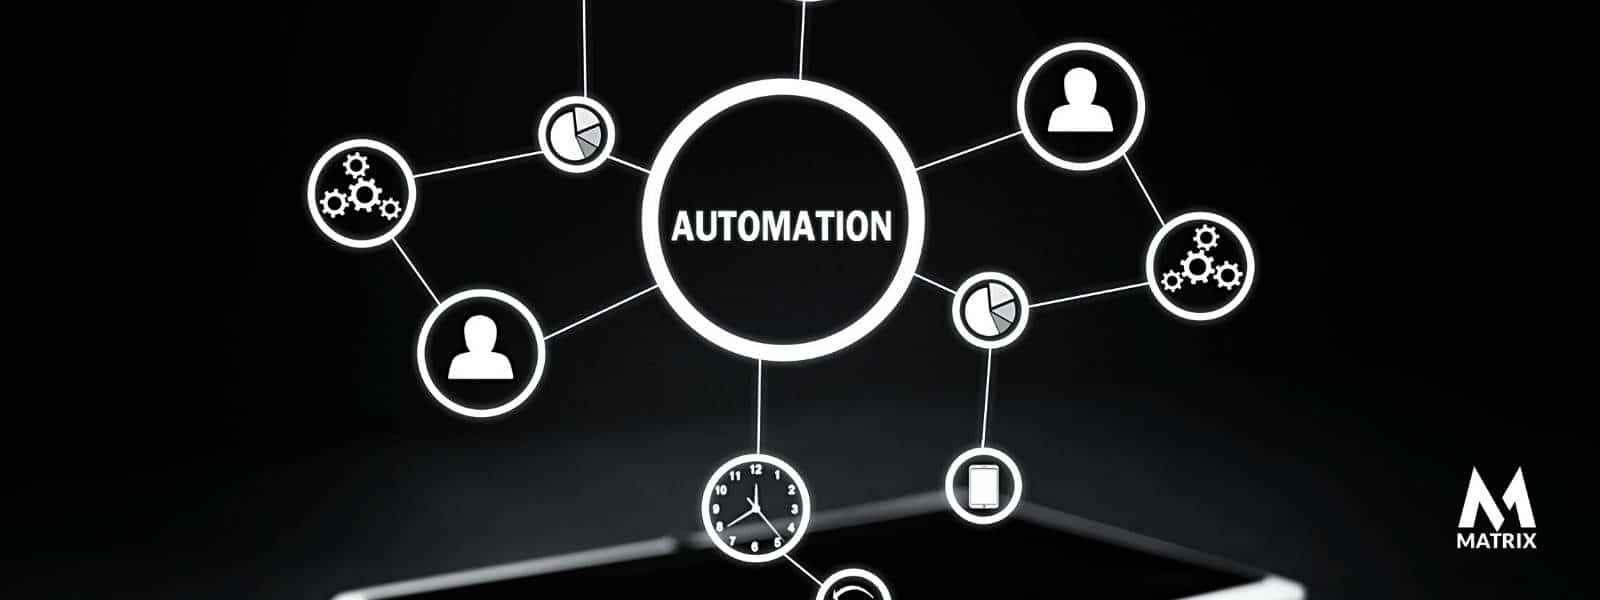 Marketing automation has long been viewed as something of a last-ditch effort for companies looking to boost their profit margins by automate business functions